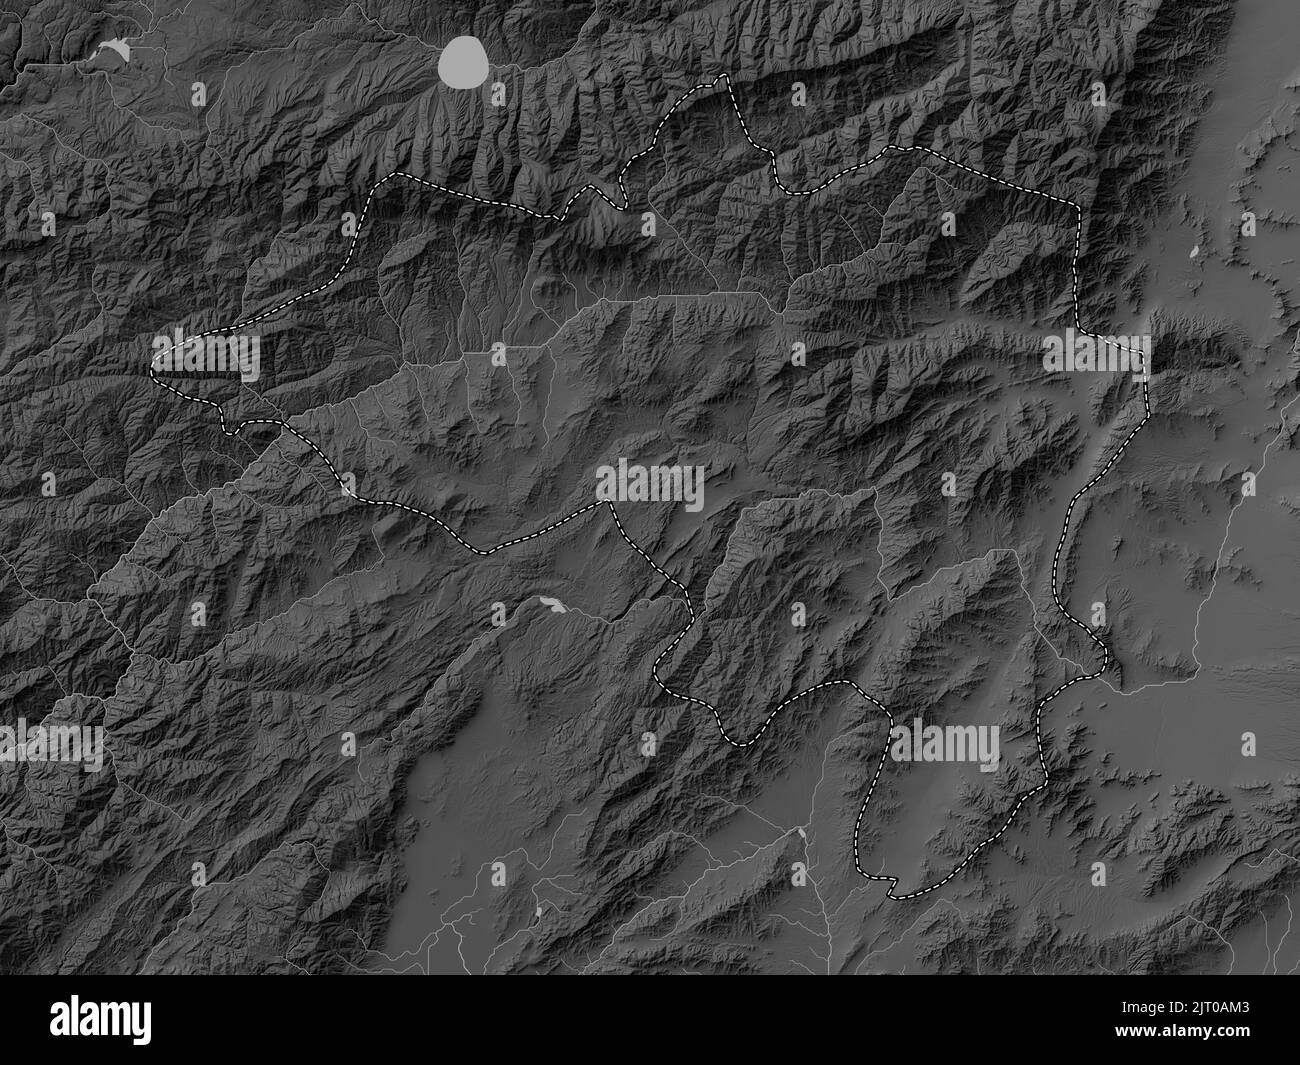 Wardak, province of Afghanistan. Grayscale elevation map with lakes and rivers Stock Photo